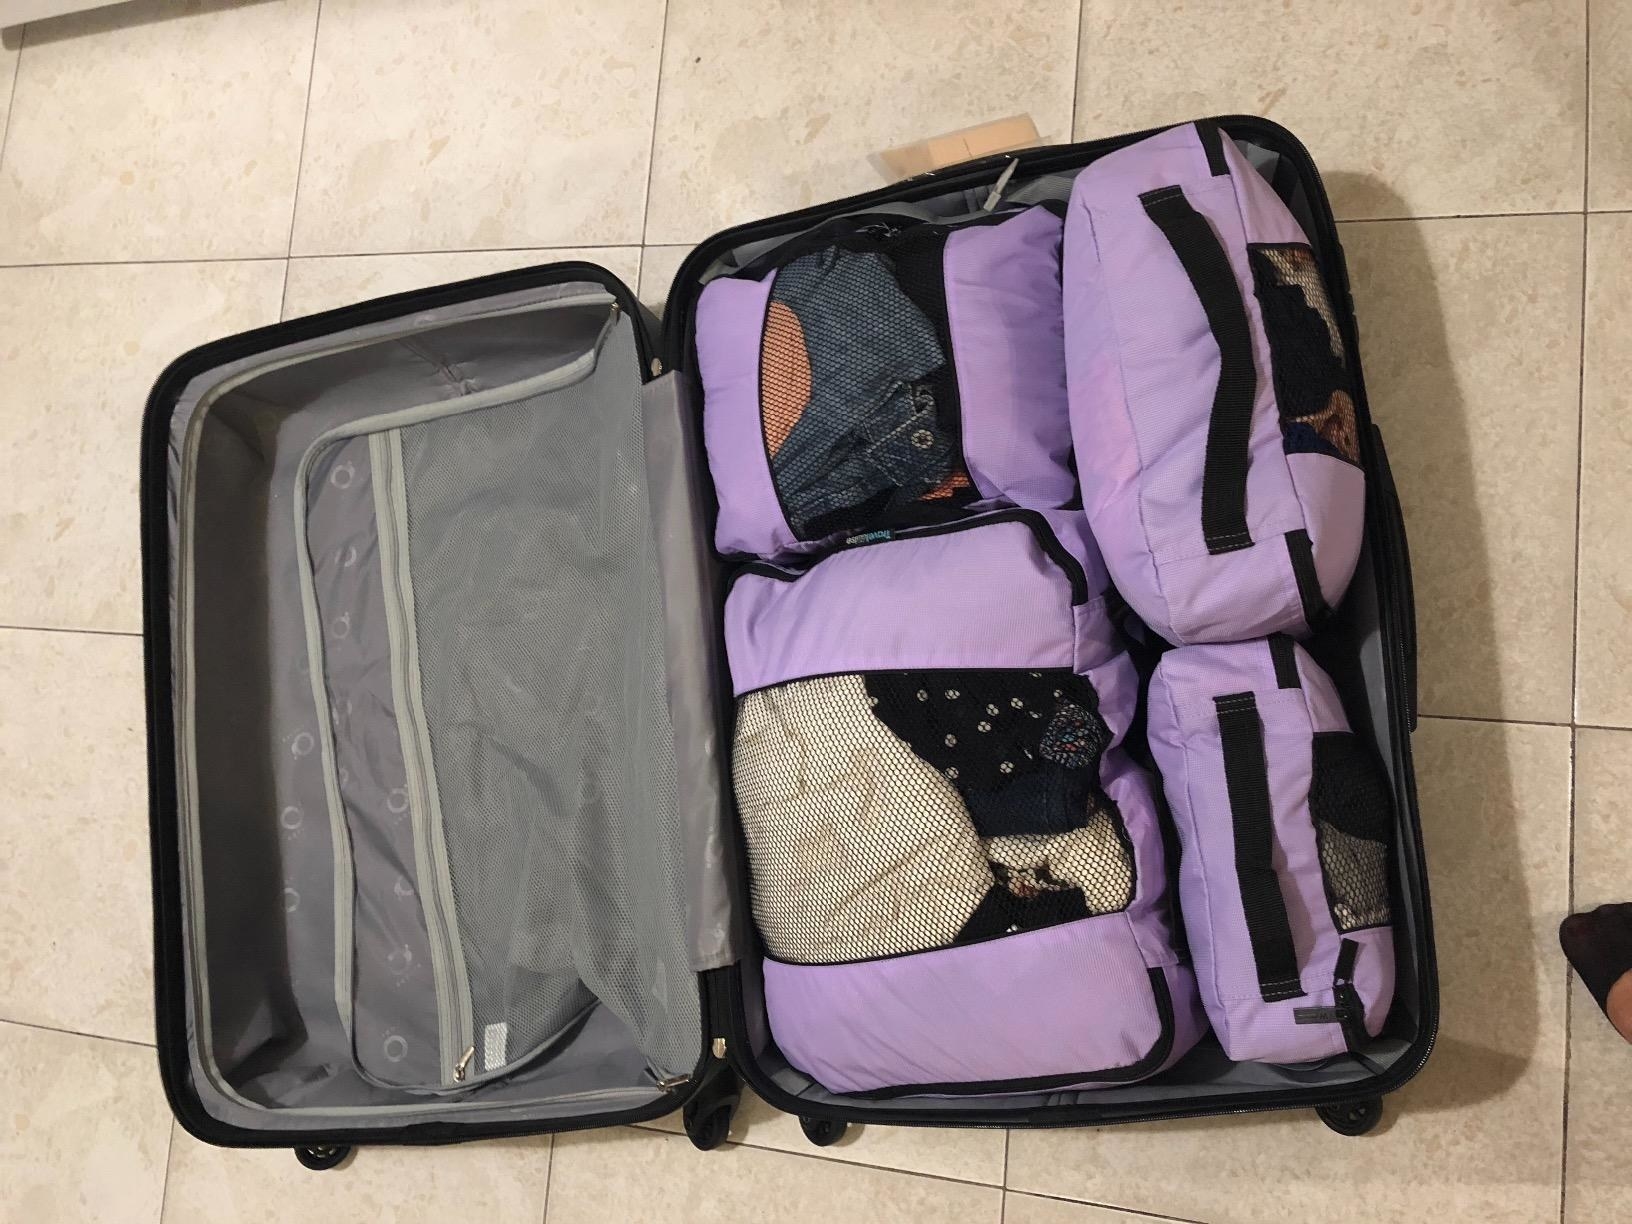 reviewer image of packed lavender packing cubes inside a suitcase